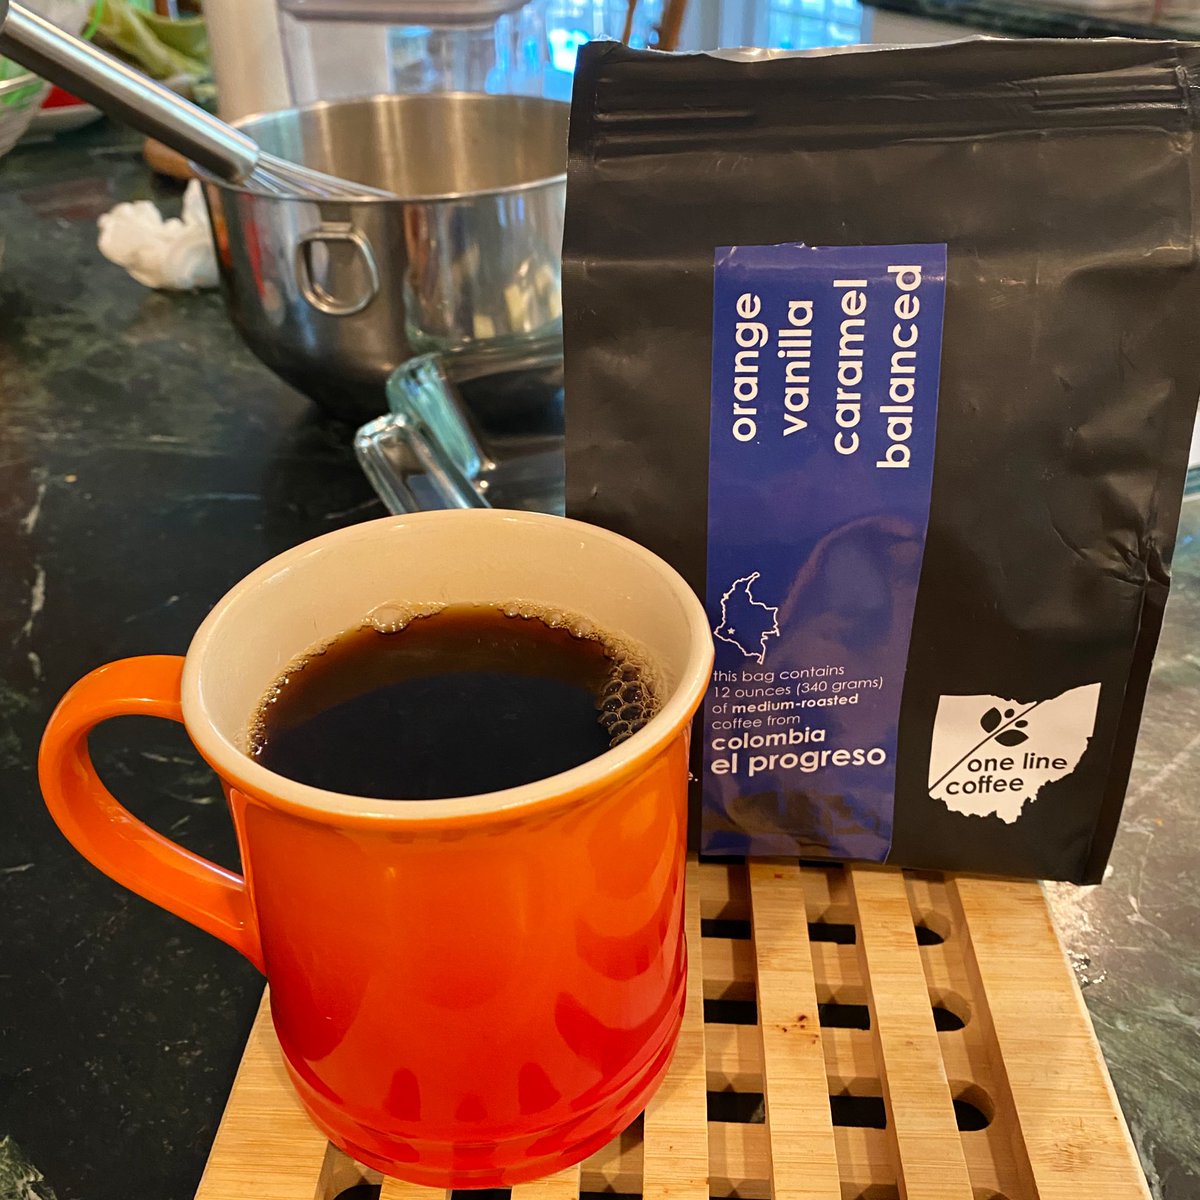 One Line Coffee Colombia El ProgresoBrewed this really wonderful coffee over the weekend and I’m absolutely digging it, further cementing Colombia as one of my favorite coffee regions. Picked this one up from  @HOMAGE who are supporting their favorite Ohio businesses!